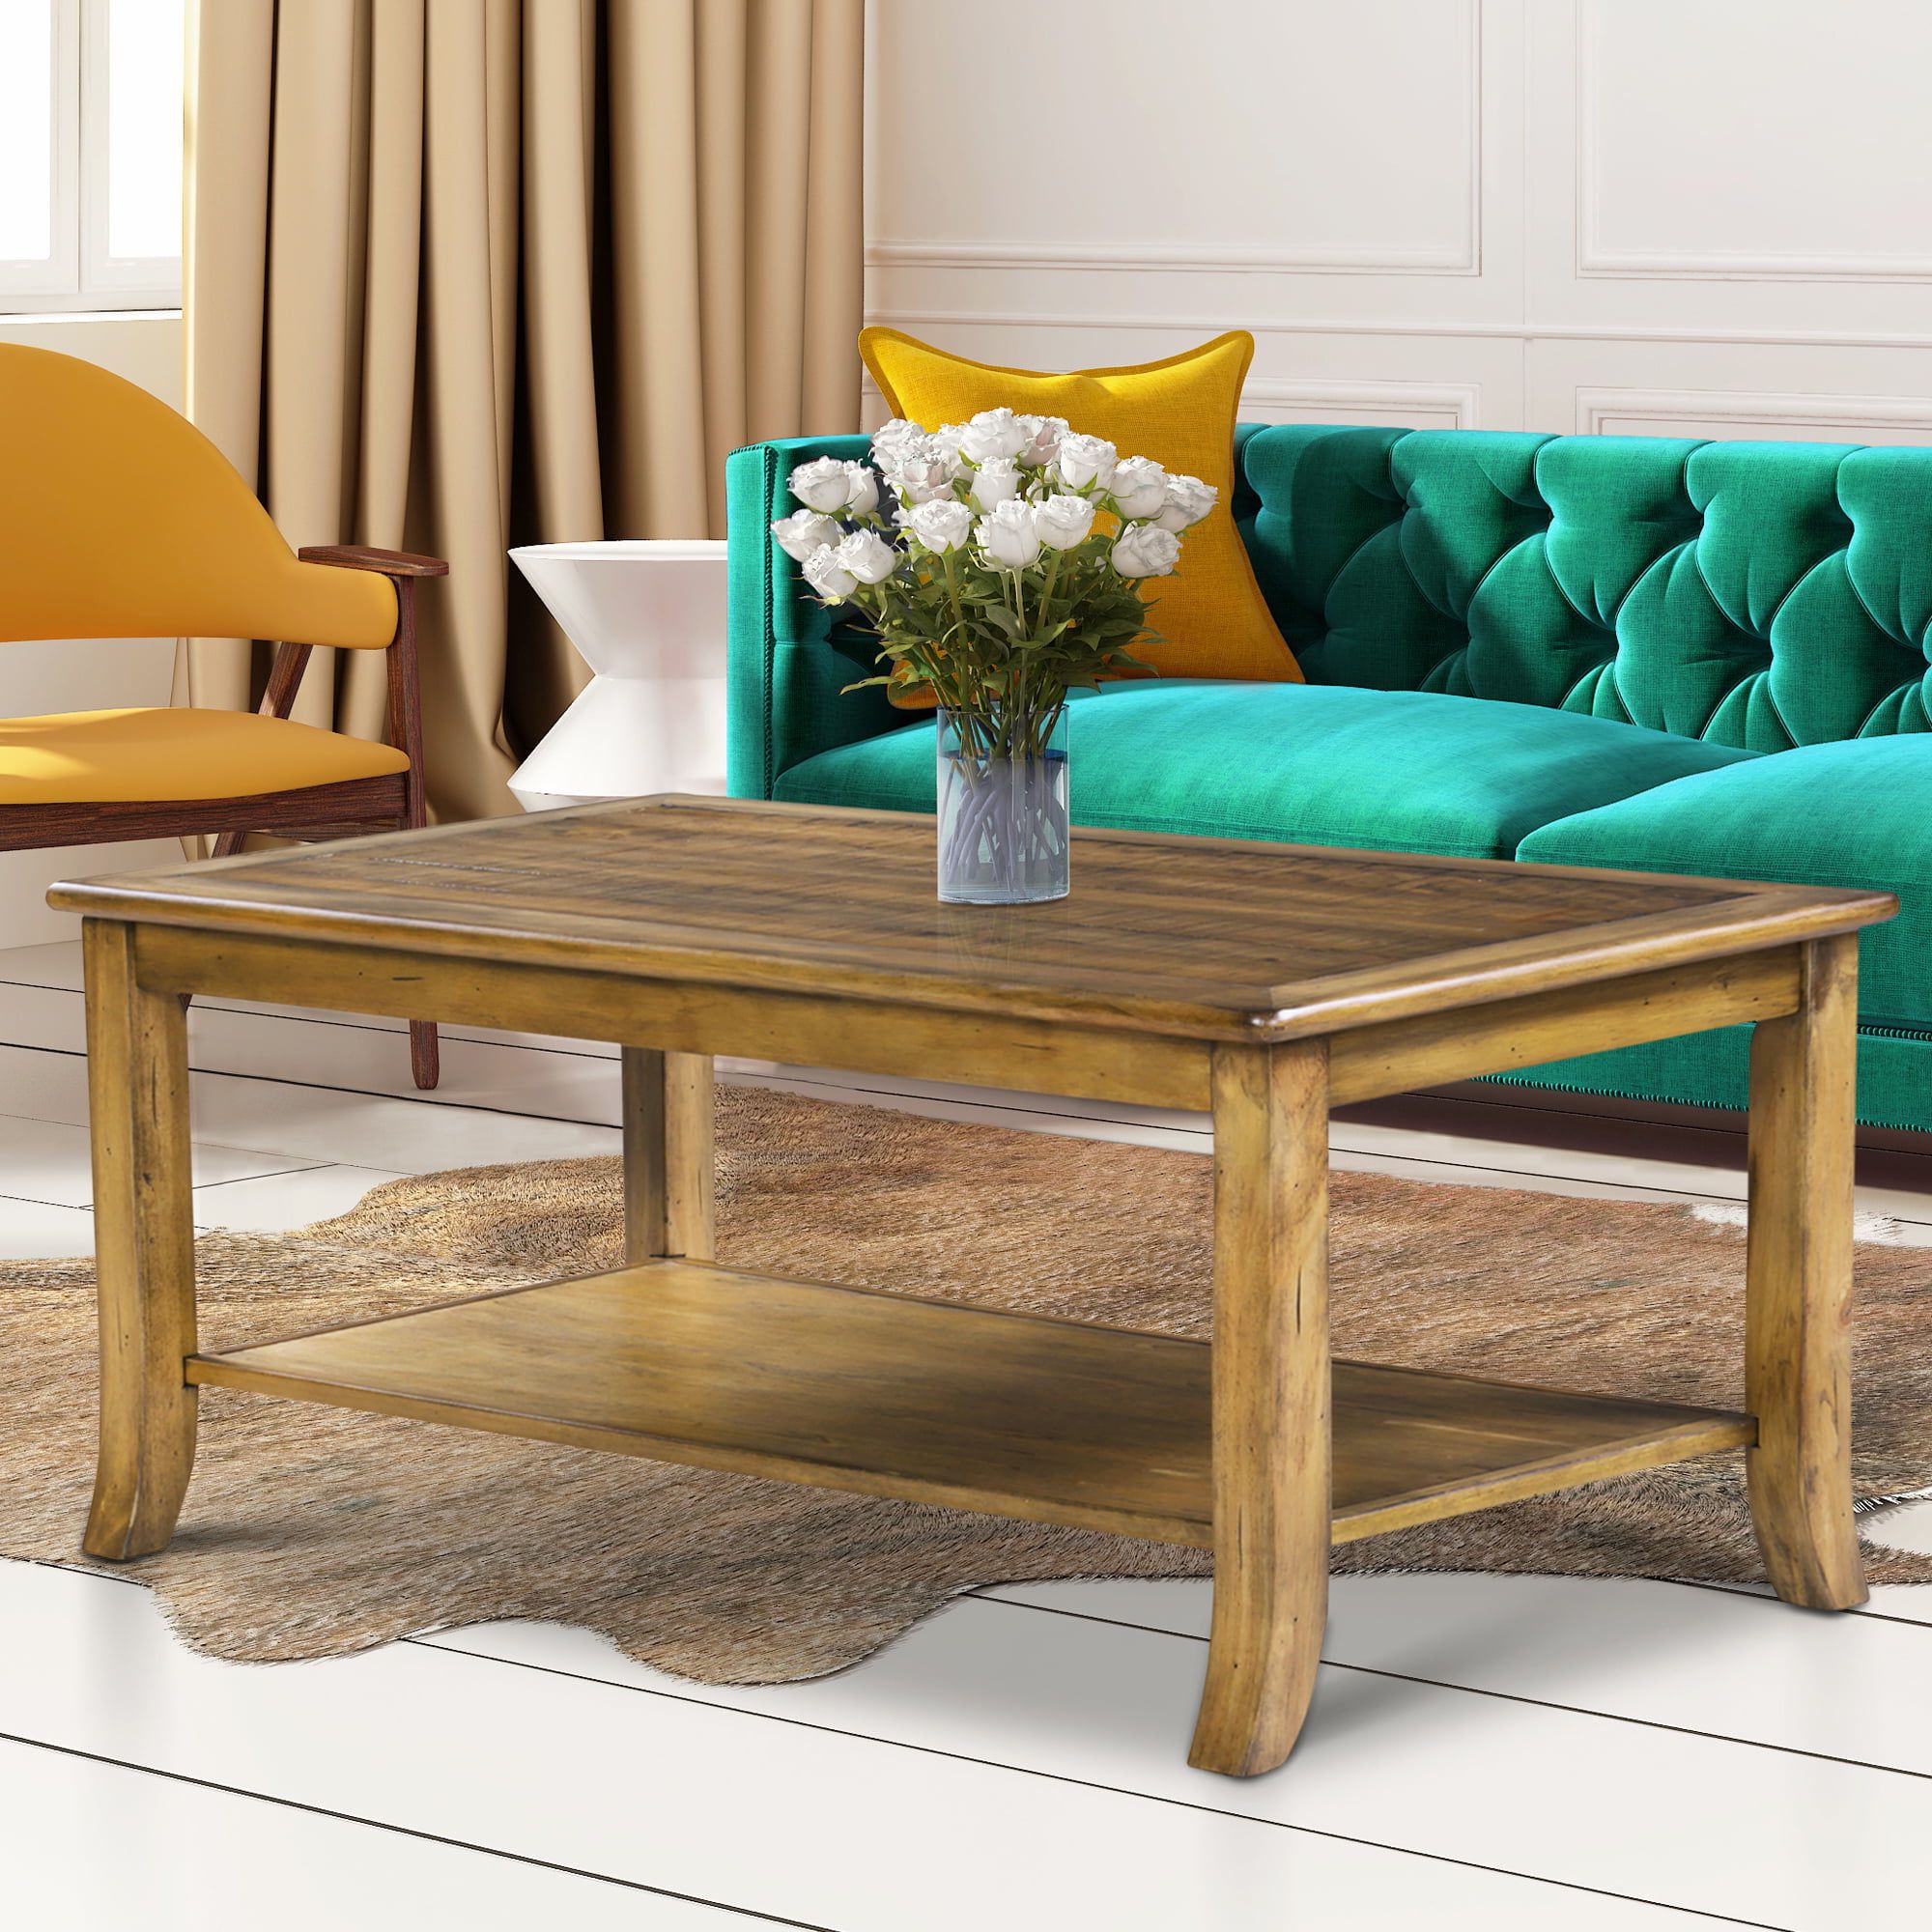 Grandrest Cocktail Coffee Table, Rustic Maple Brown – Walmart Inside Brown Rustic Coffee Tables (View 4 of 20)